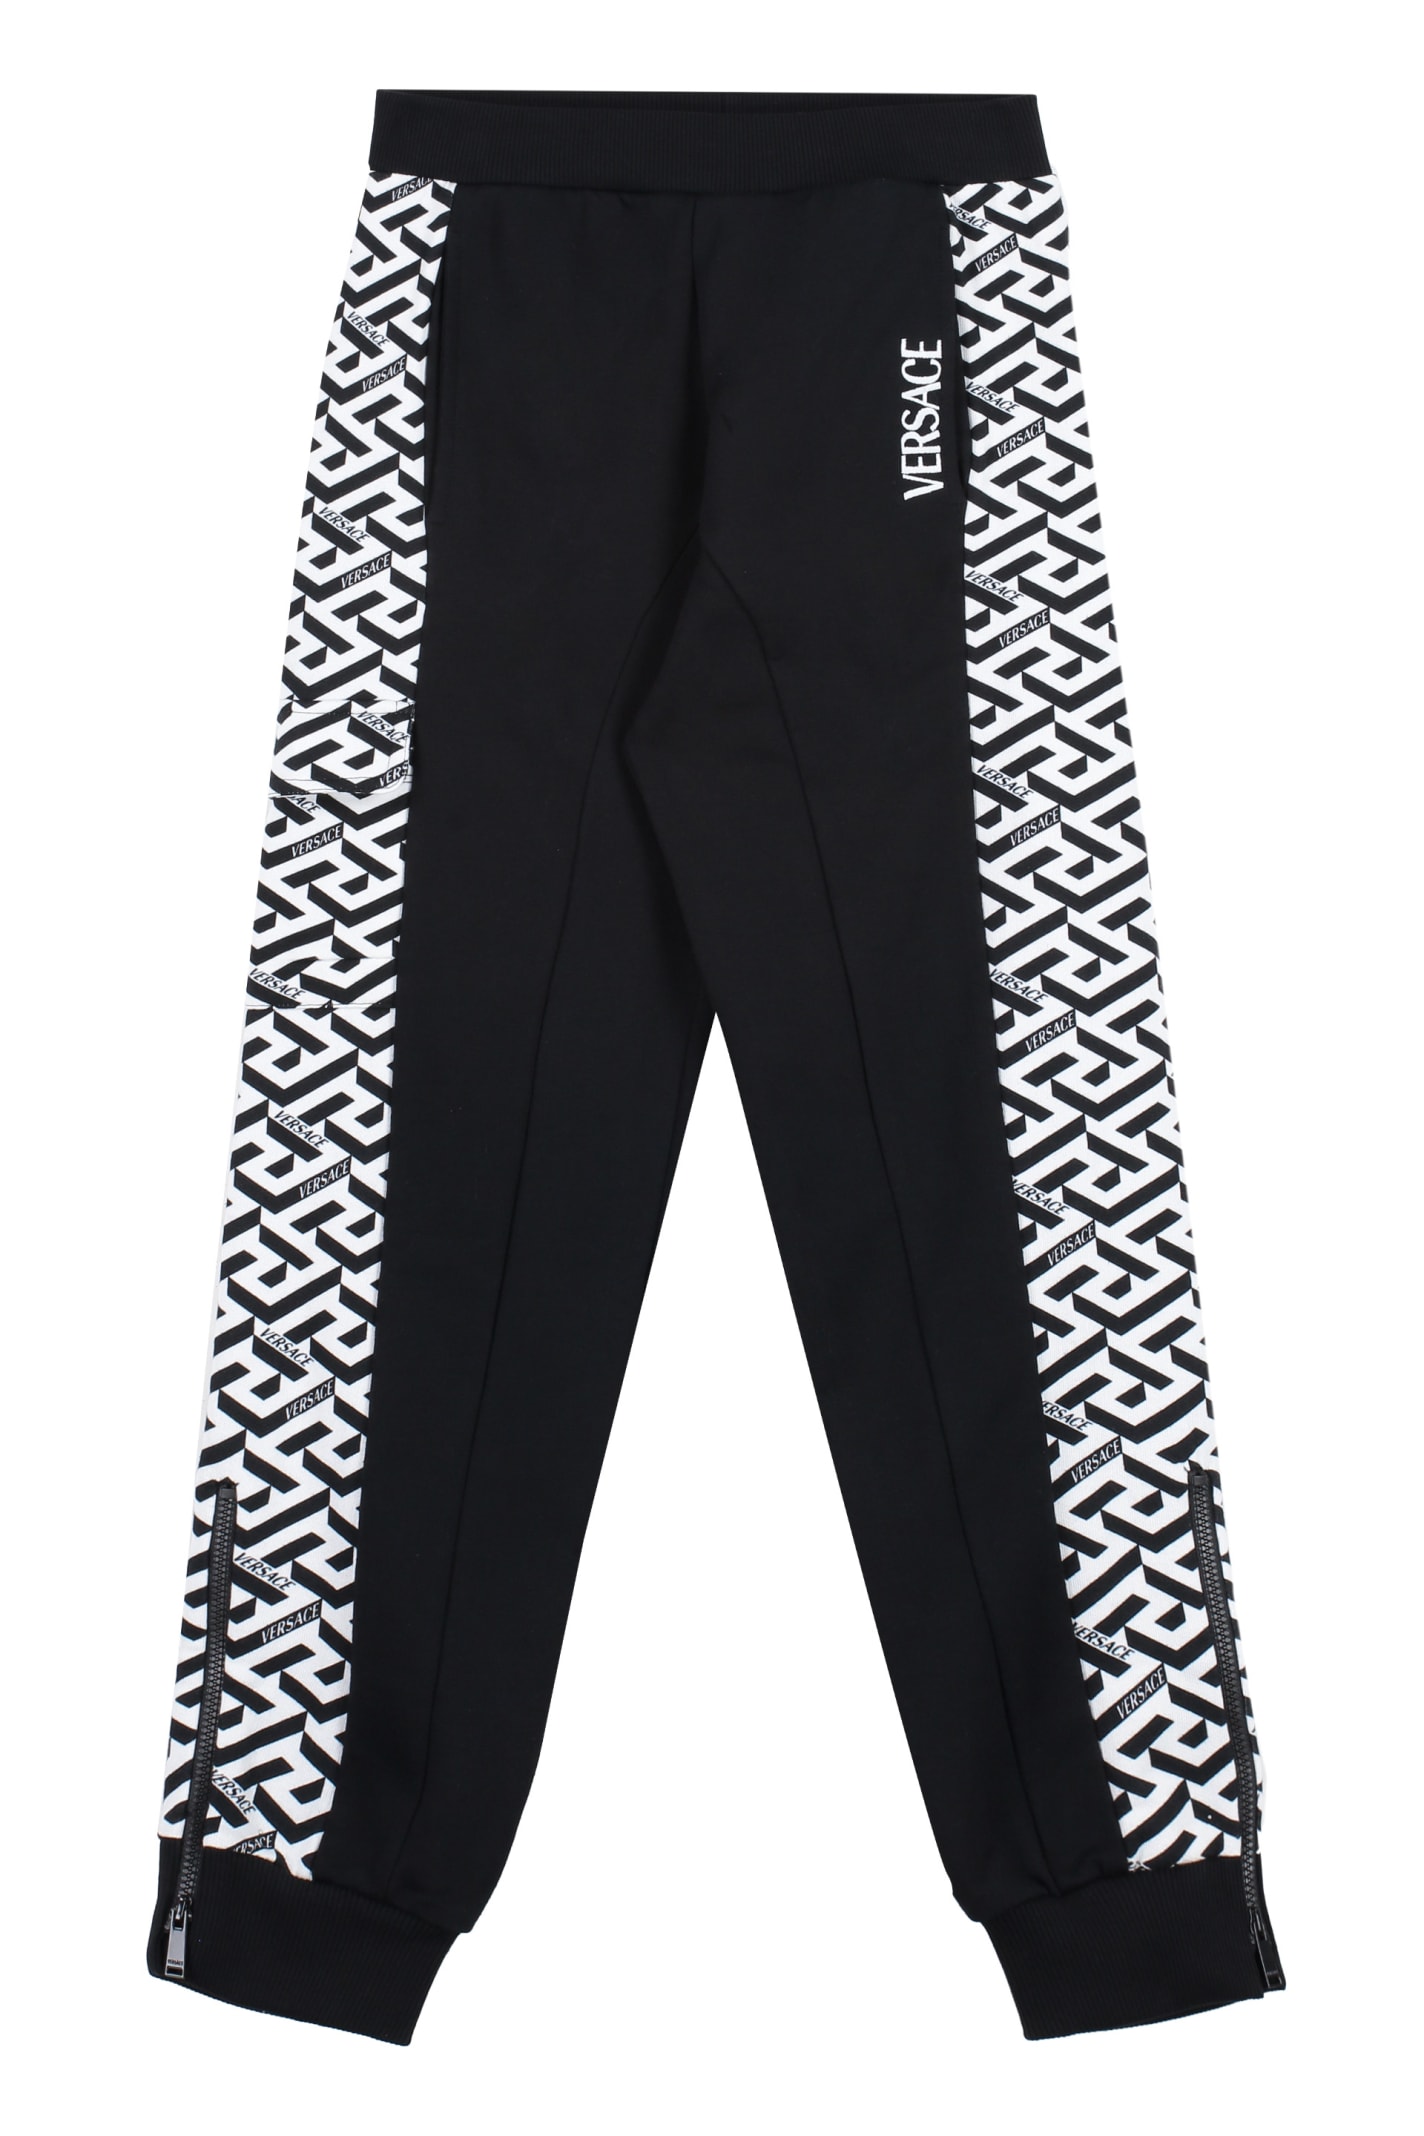 YOUNG VERSACE LOGO EMBROIDERY SWEATPANTS